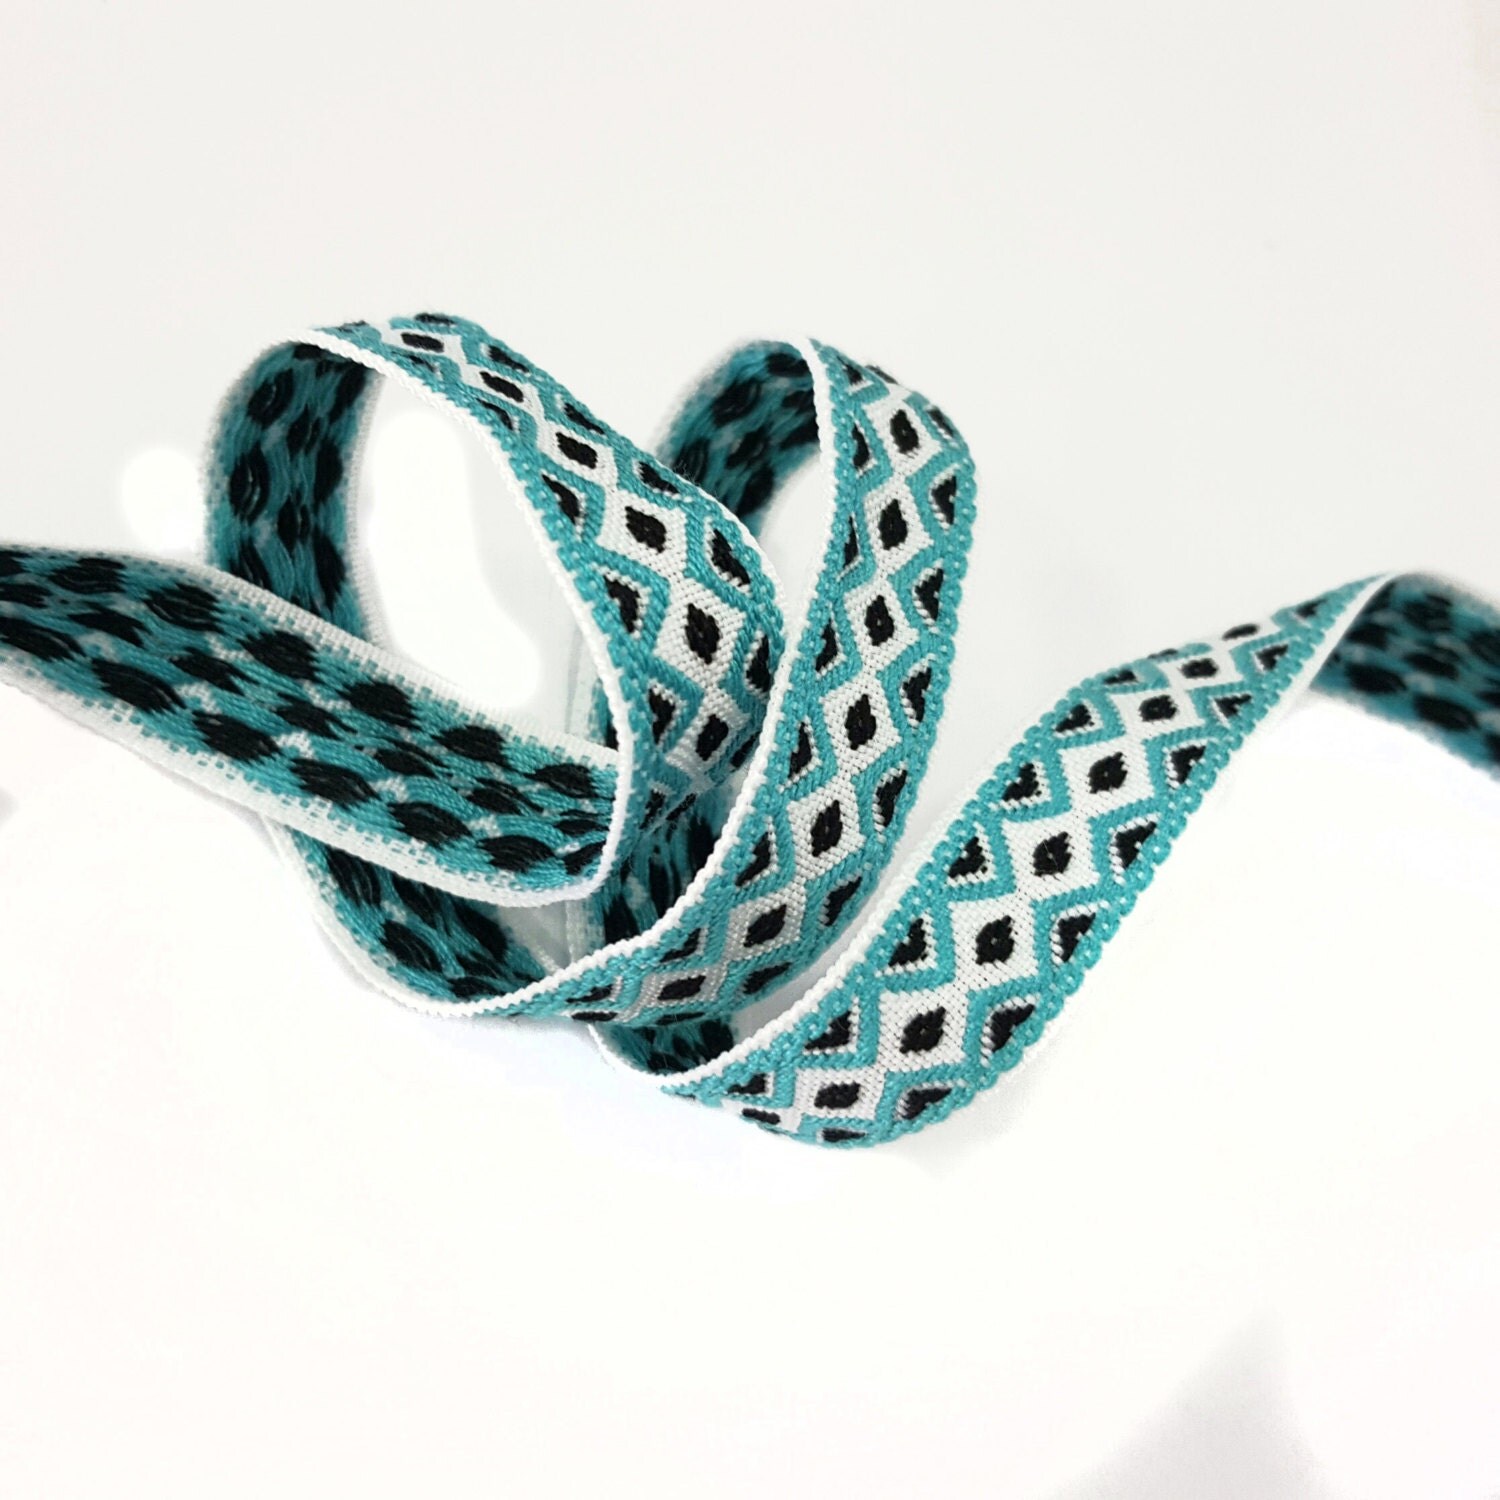 2 YARDS Turquoise Tribal Ethnic Knitted Aztec Ribbon Woven